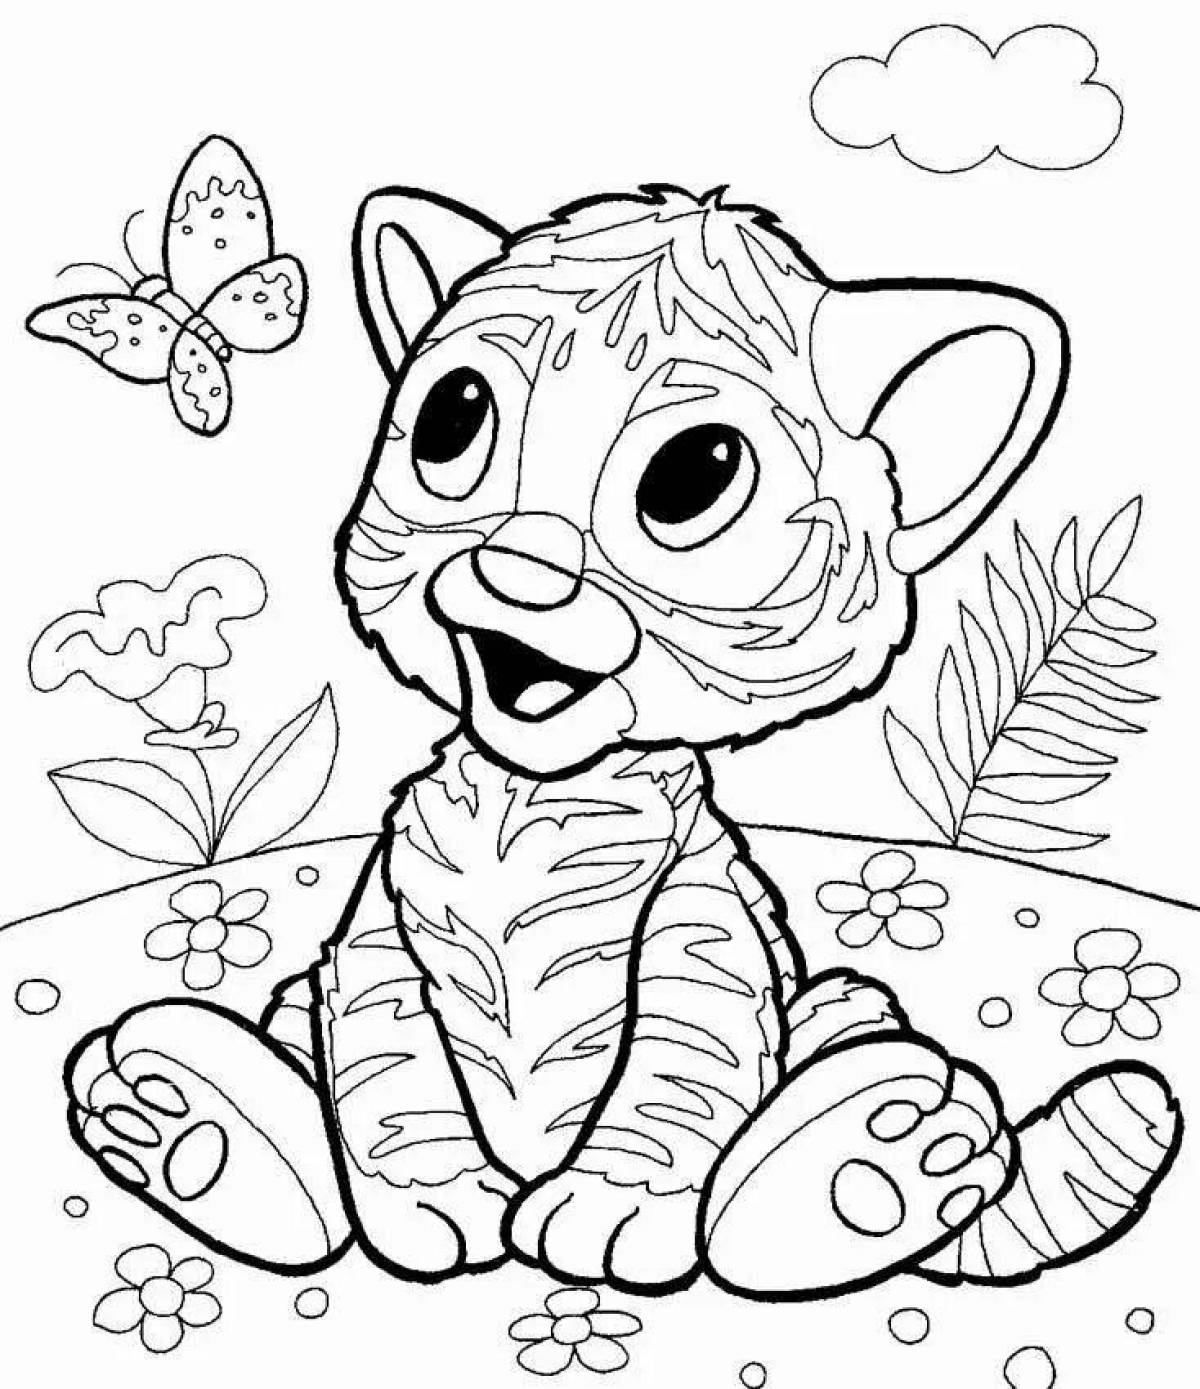 Awesome coloring book popular in 2022